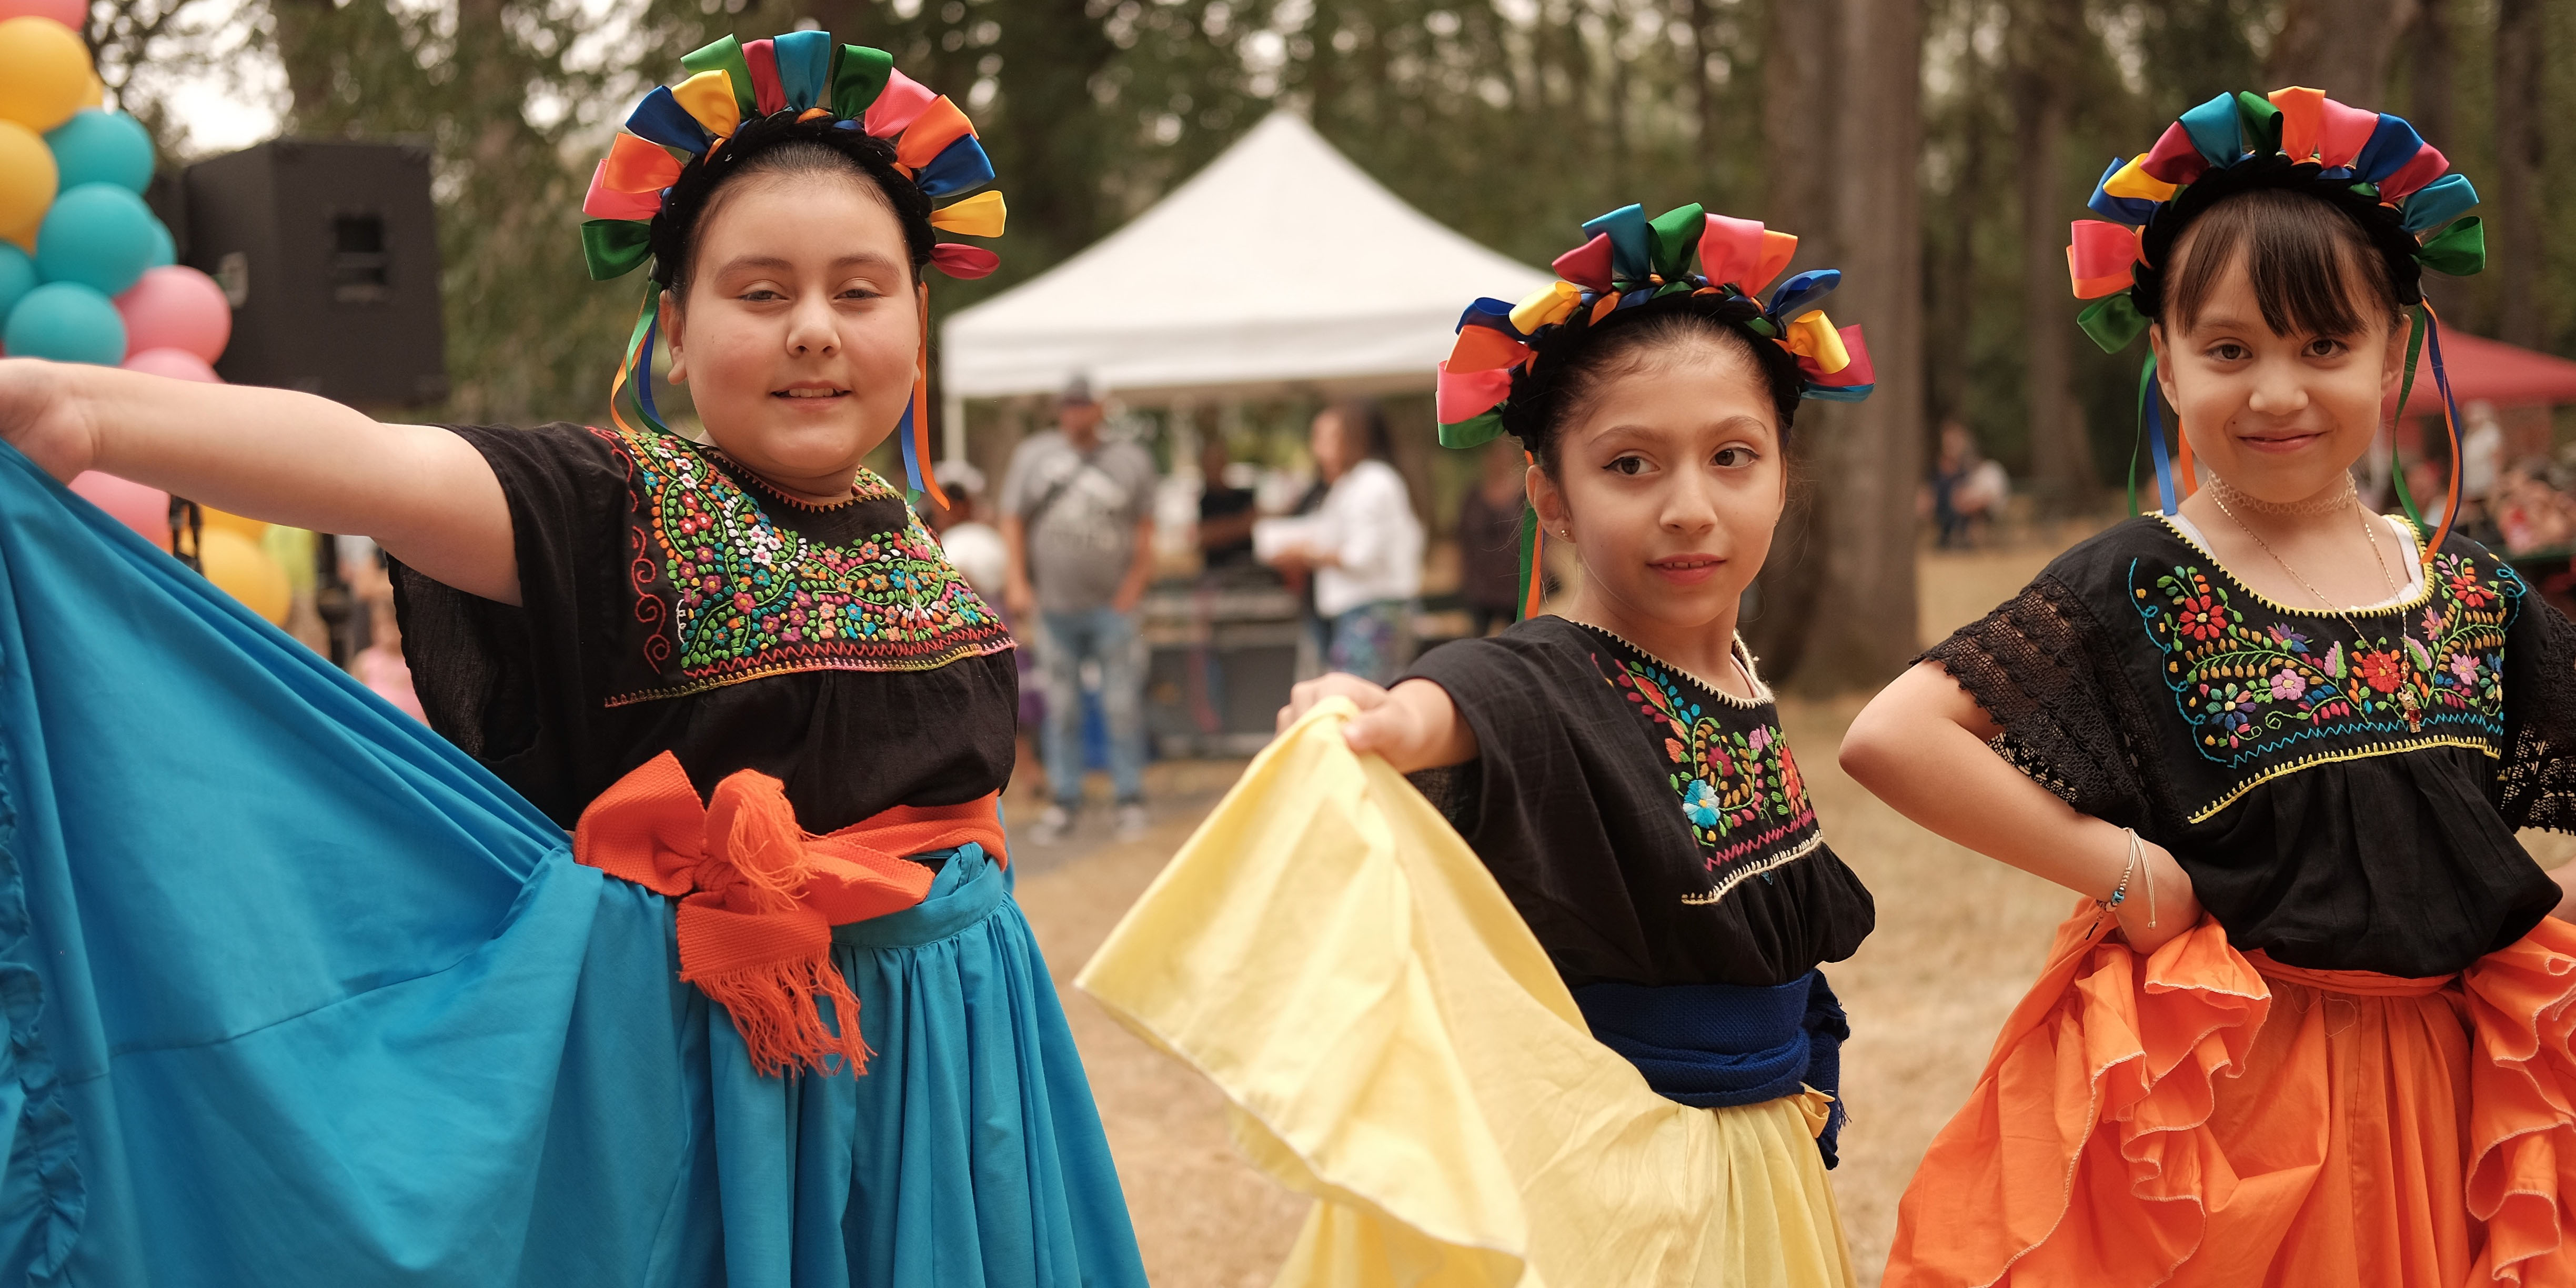 Three girls in folk dresses hold out their bright-colored skirts